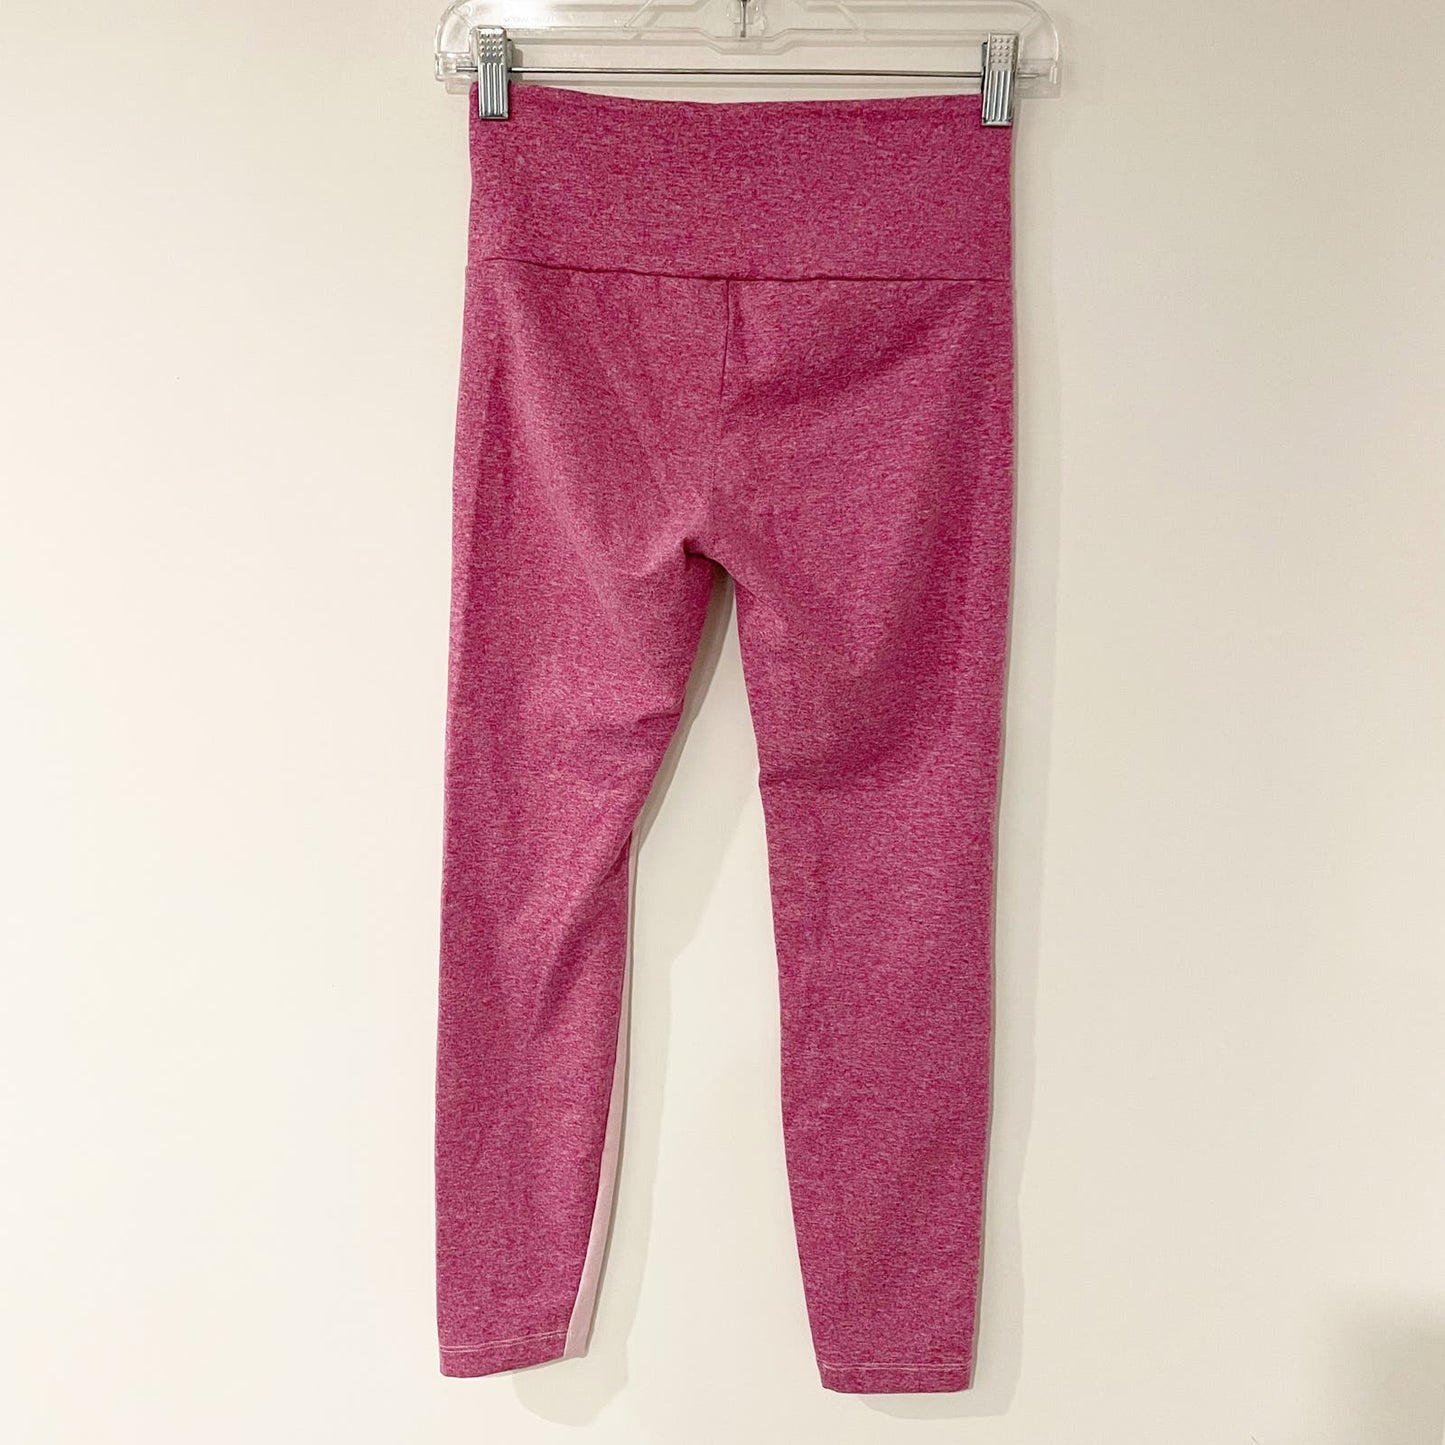 Anthropologie Daily Practice Colorblock High Rise Leggings Pink Small